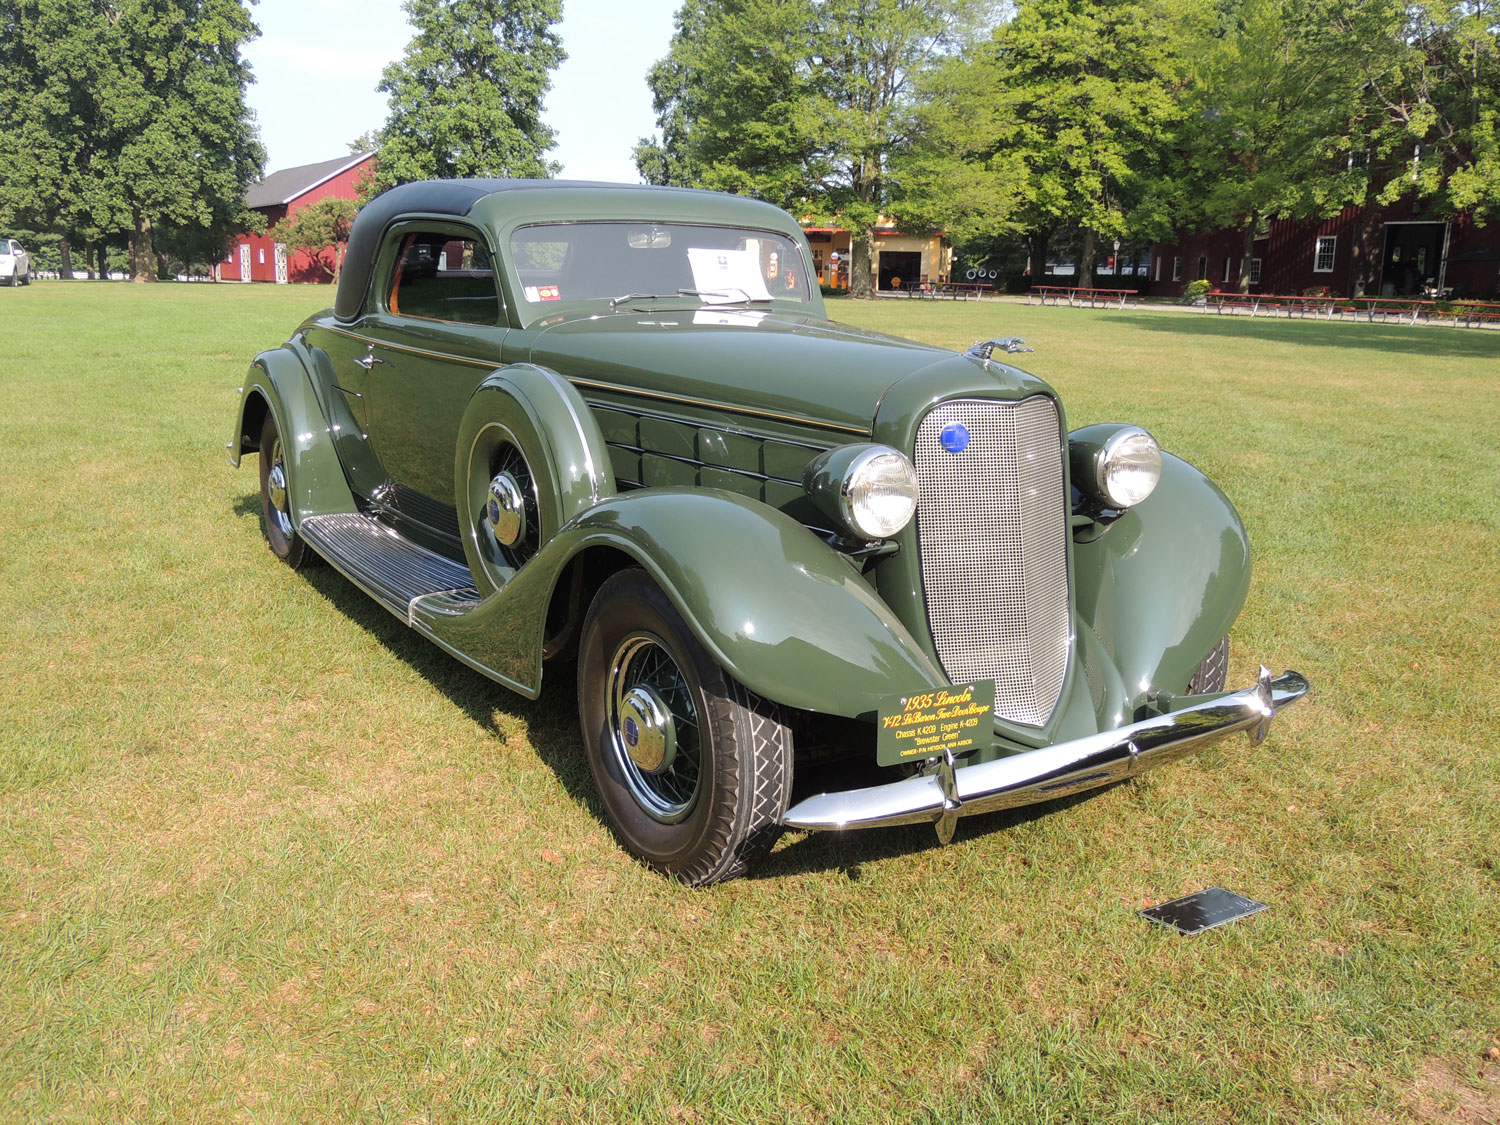 Best in show: 1935 Lincoln LeBaron coupe owned by Dr. Peter Heydon.